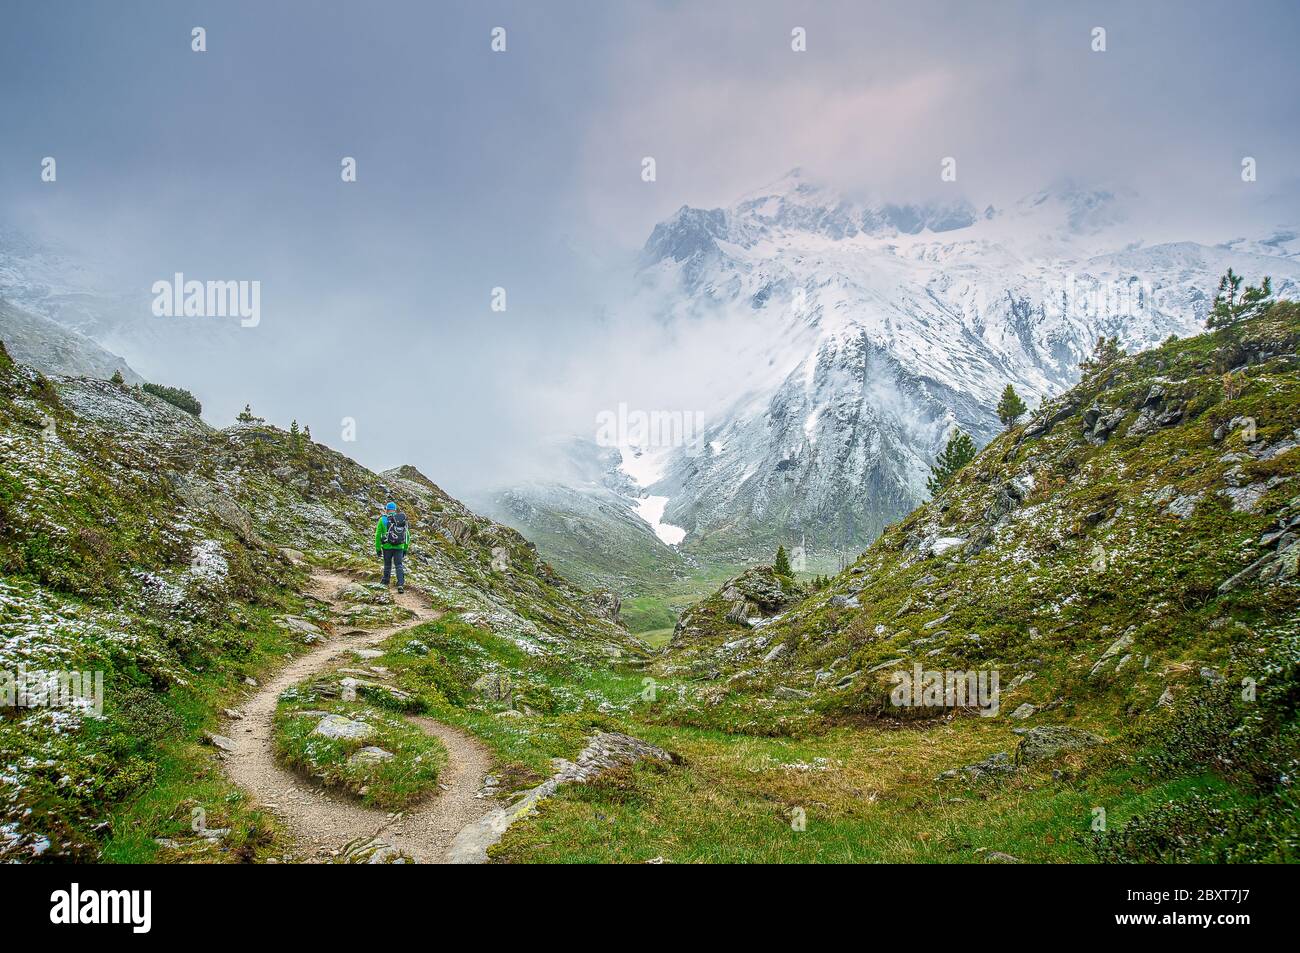 Foggy view at a mountain scenery in the austrian alps. A hiker from behind is watching at the snowy peak far away through the fog Stock Photo